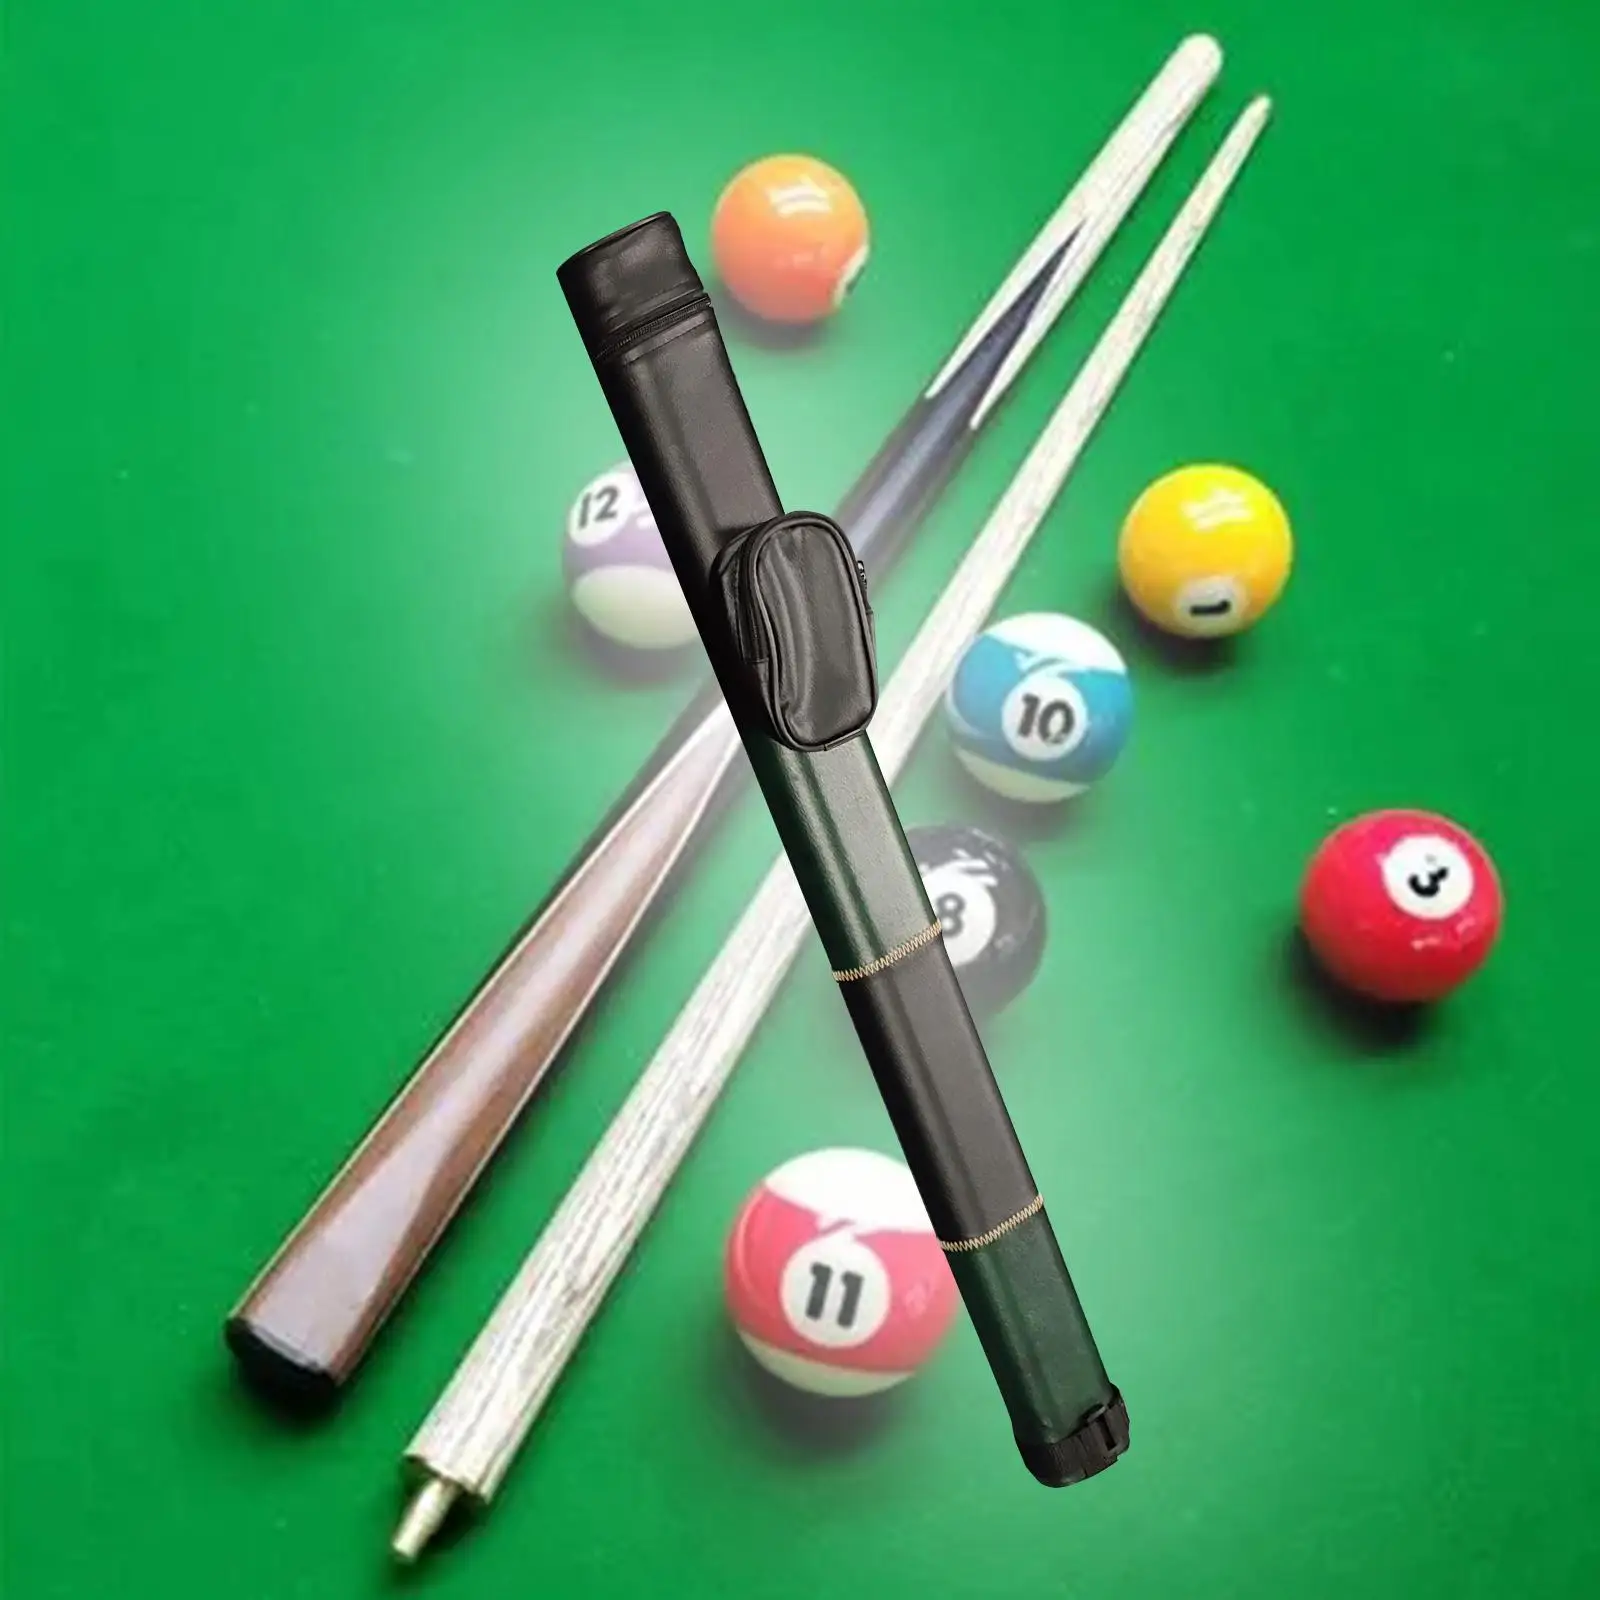 Billiards Pool Cue Case PU Leather with Zipper Billiard Pool Cue Rod Carrying Bag for Games Snooker Sports Women Men Equipment